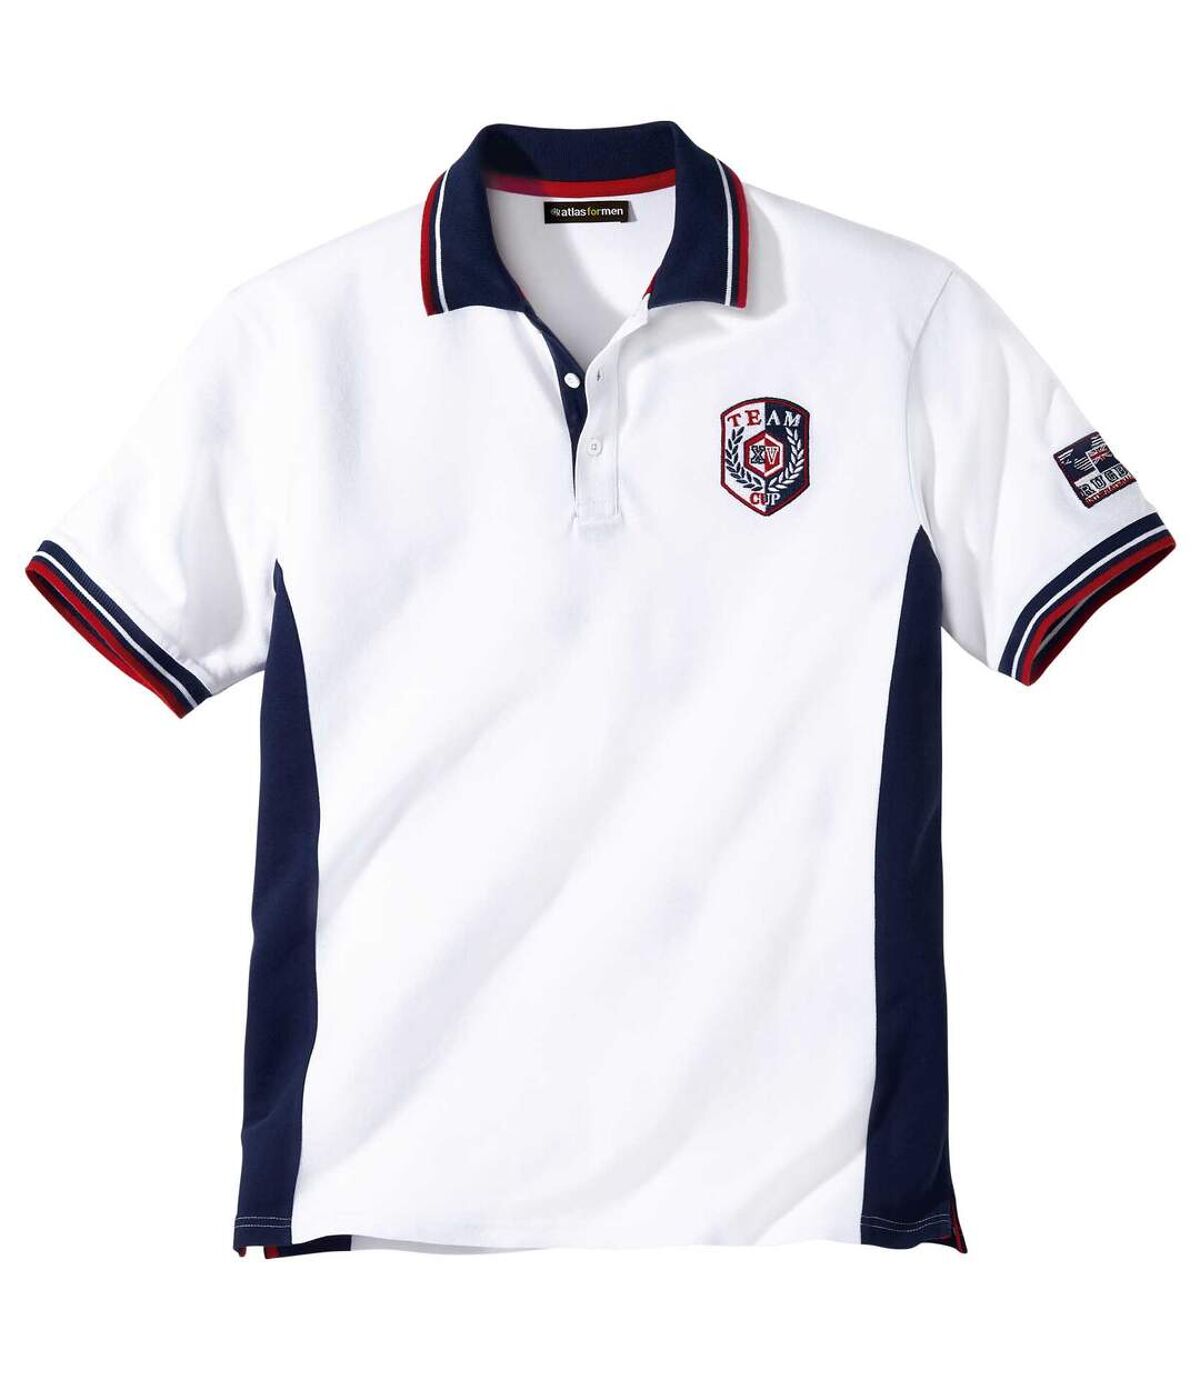 Men's Rugby-Style Long Sleeve Polo Shirt - White Navy Red  Atlas For Men